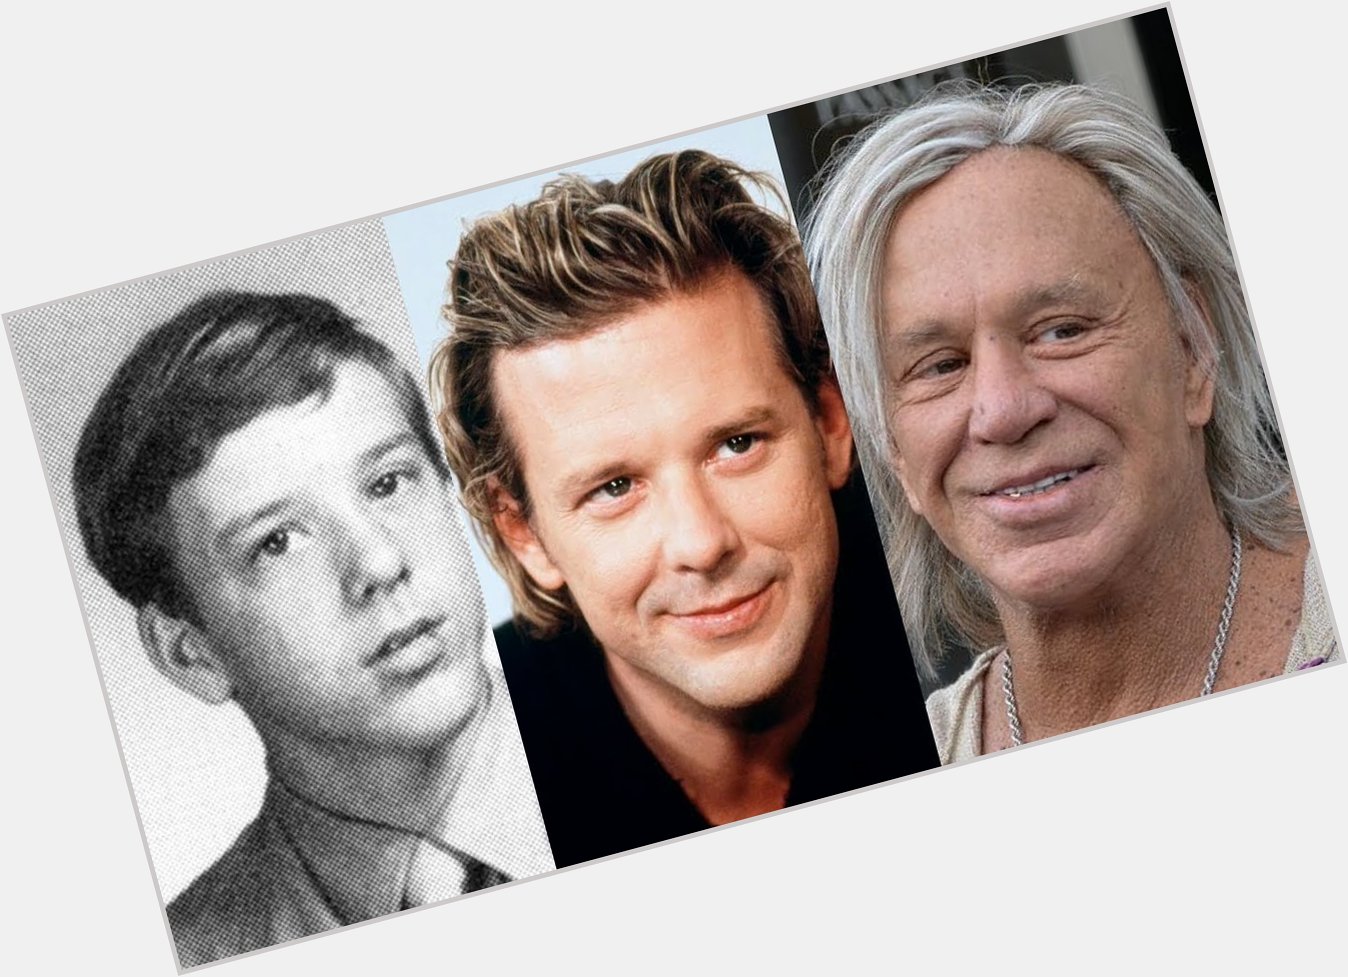 September 16, 2020
Happy birthday to American actor Mickey Rourke 68 years old. 